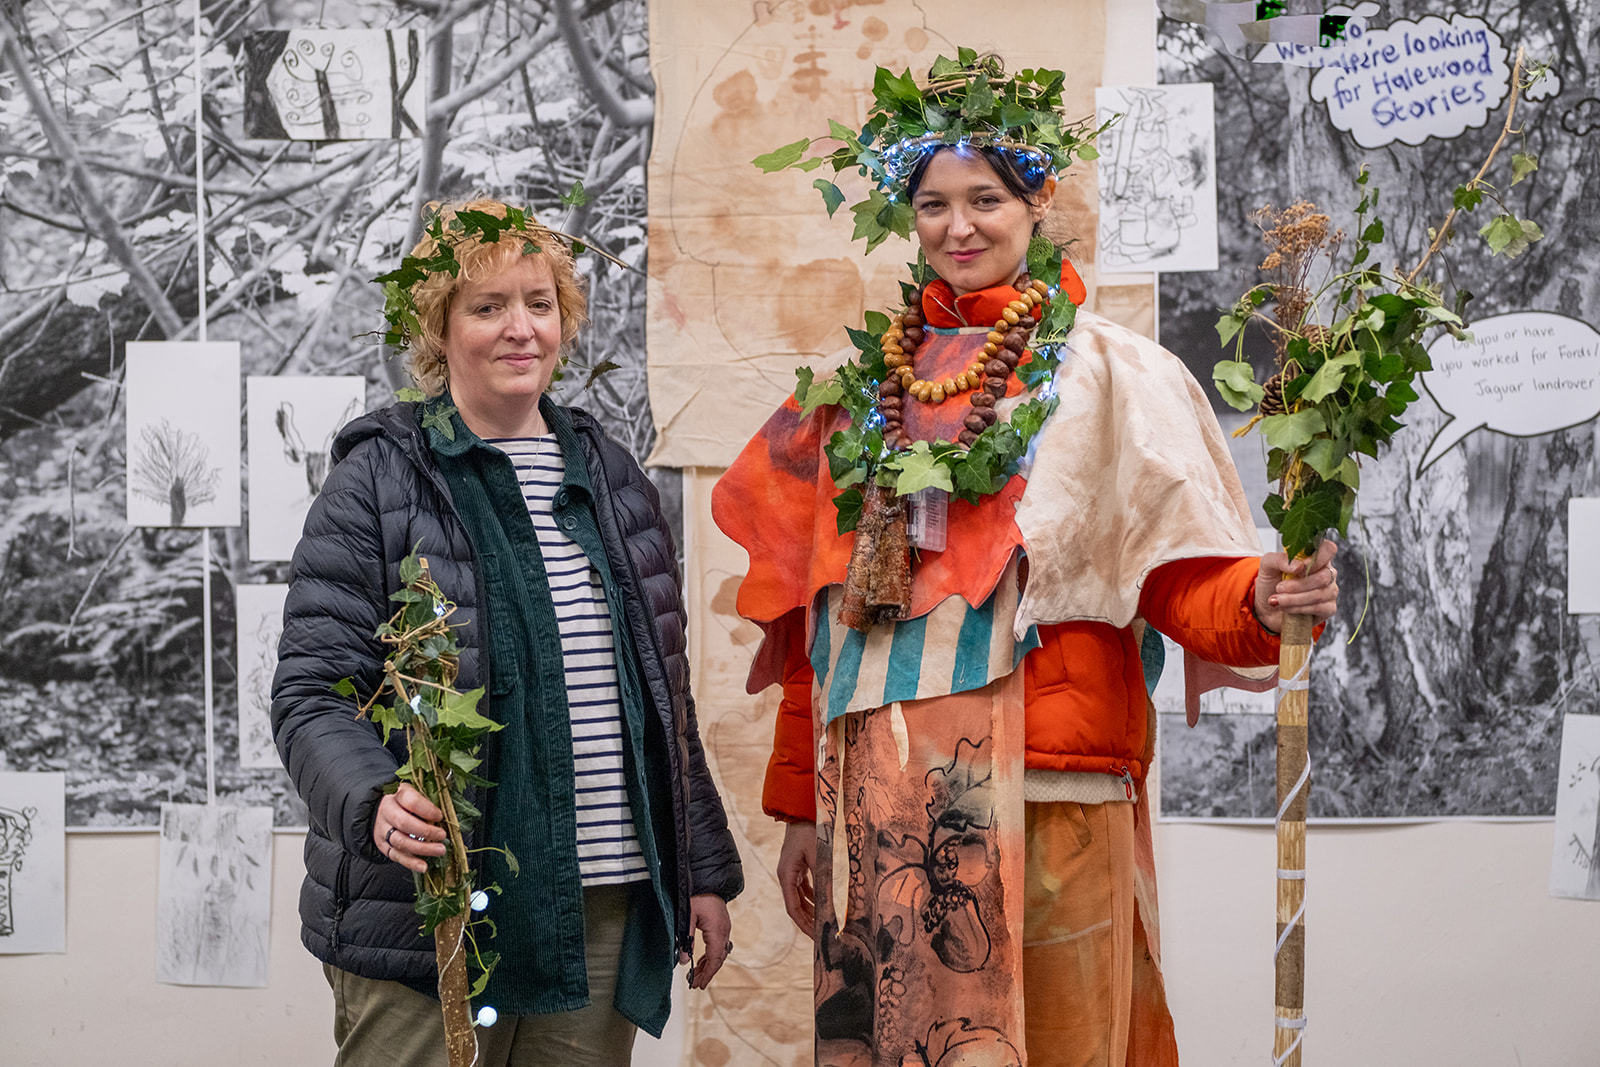 Frances Disley stood with performer Maria Malone, who is holding a staff wrapped in leaves, and a headless made of leaves and lights, along with printed fabrics with illustrations of elements of the woods on them.